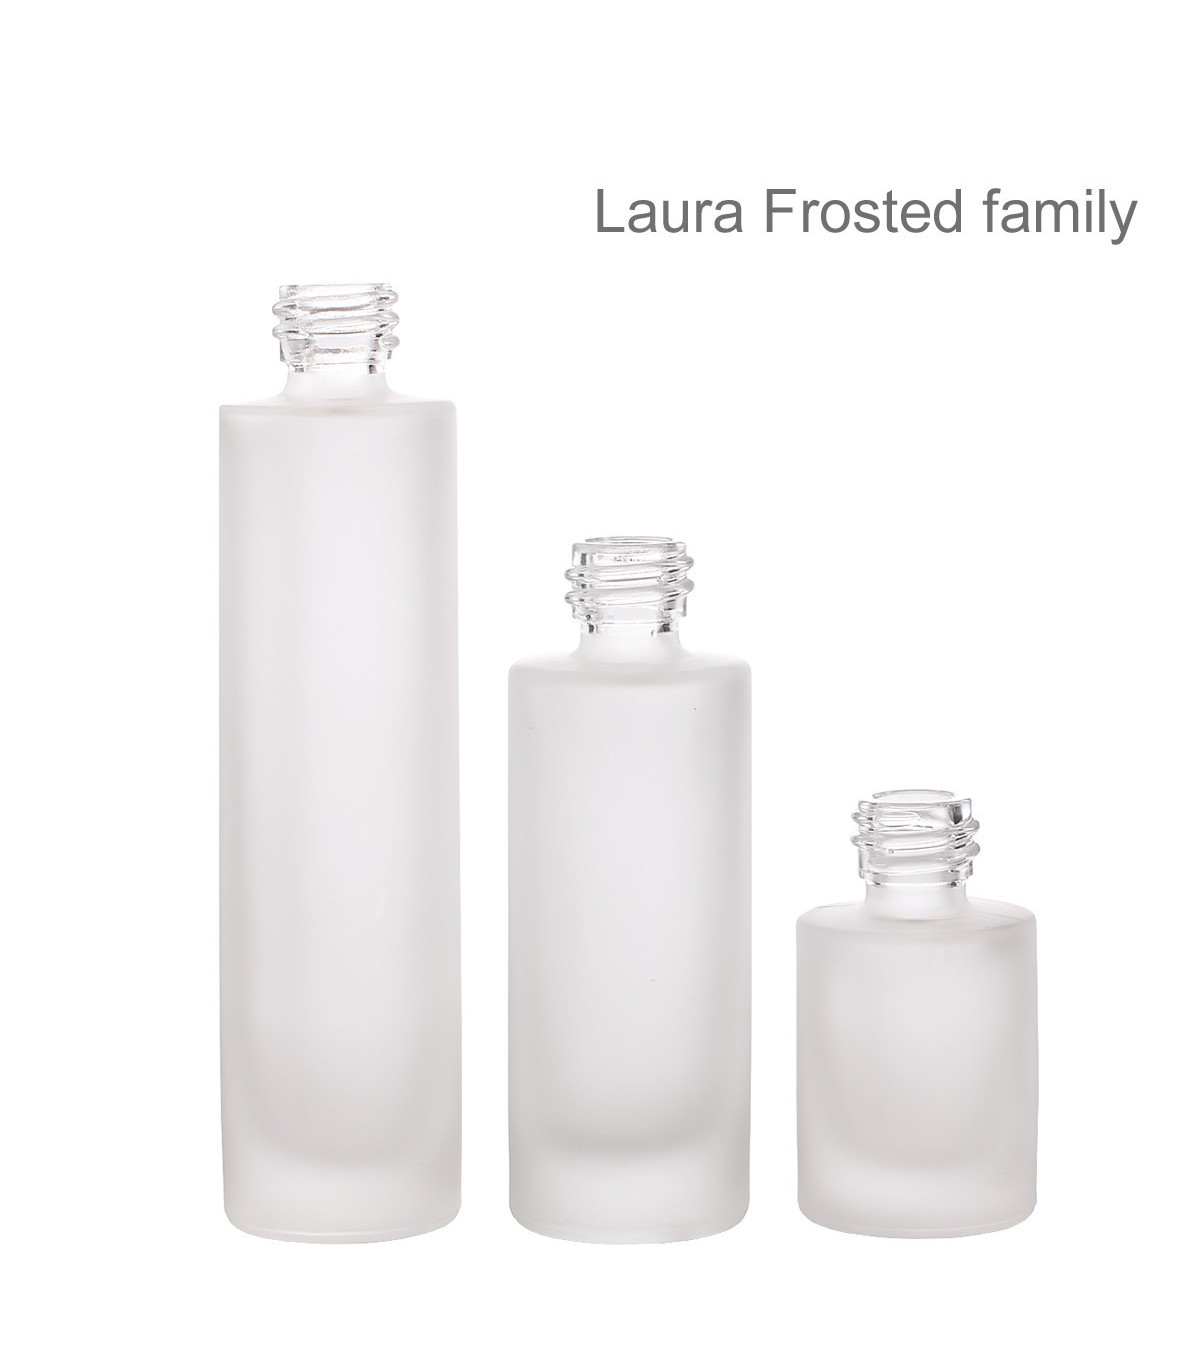 Flacon sticlă Laura Frosted, 50 ml